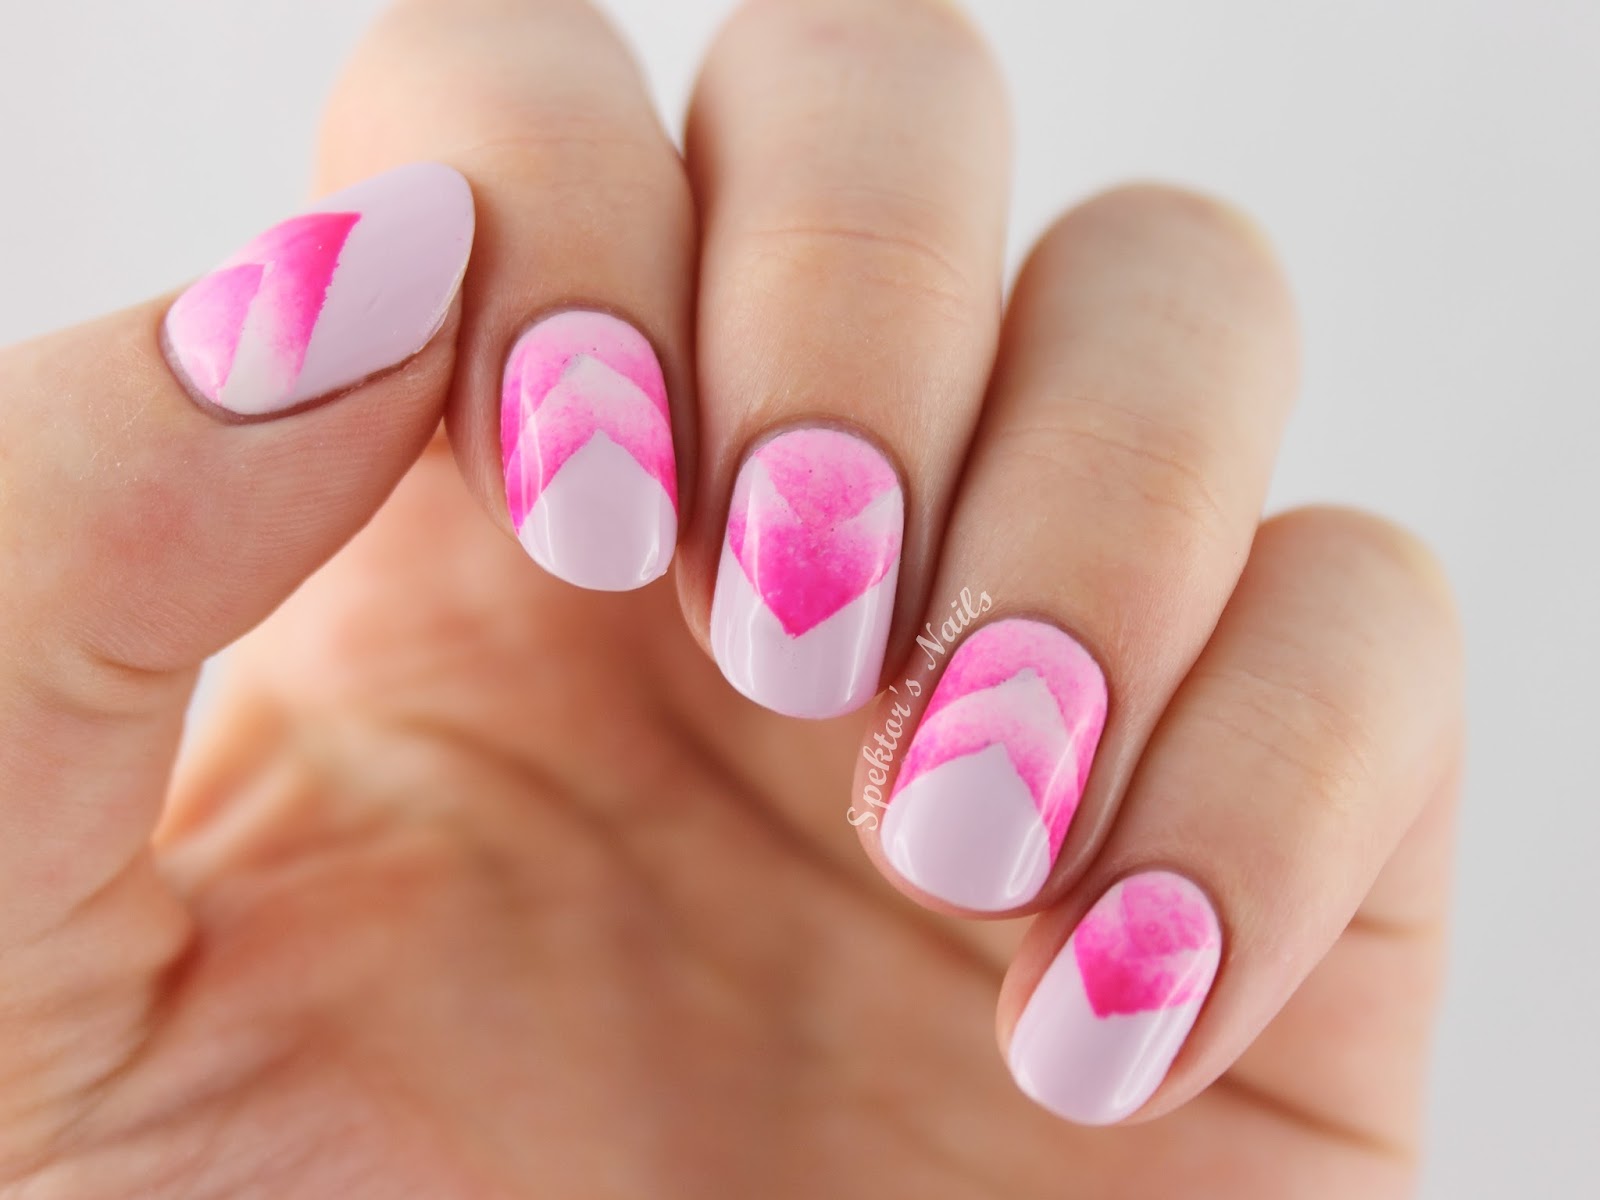 Gorgeous Gradient Nail Art Designs For The Perfect Manicure